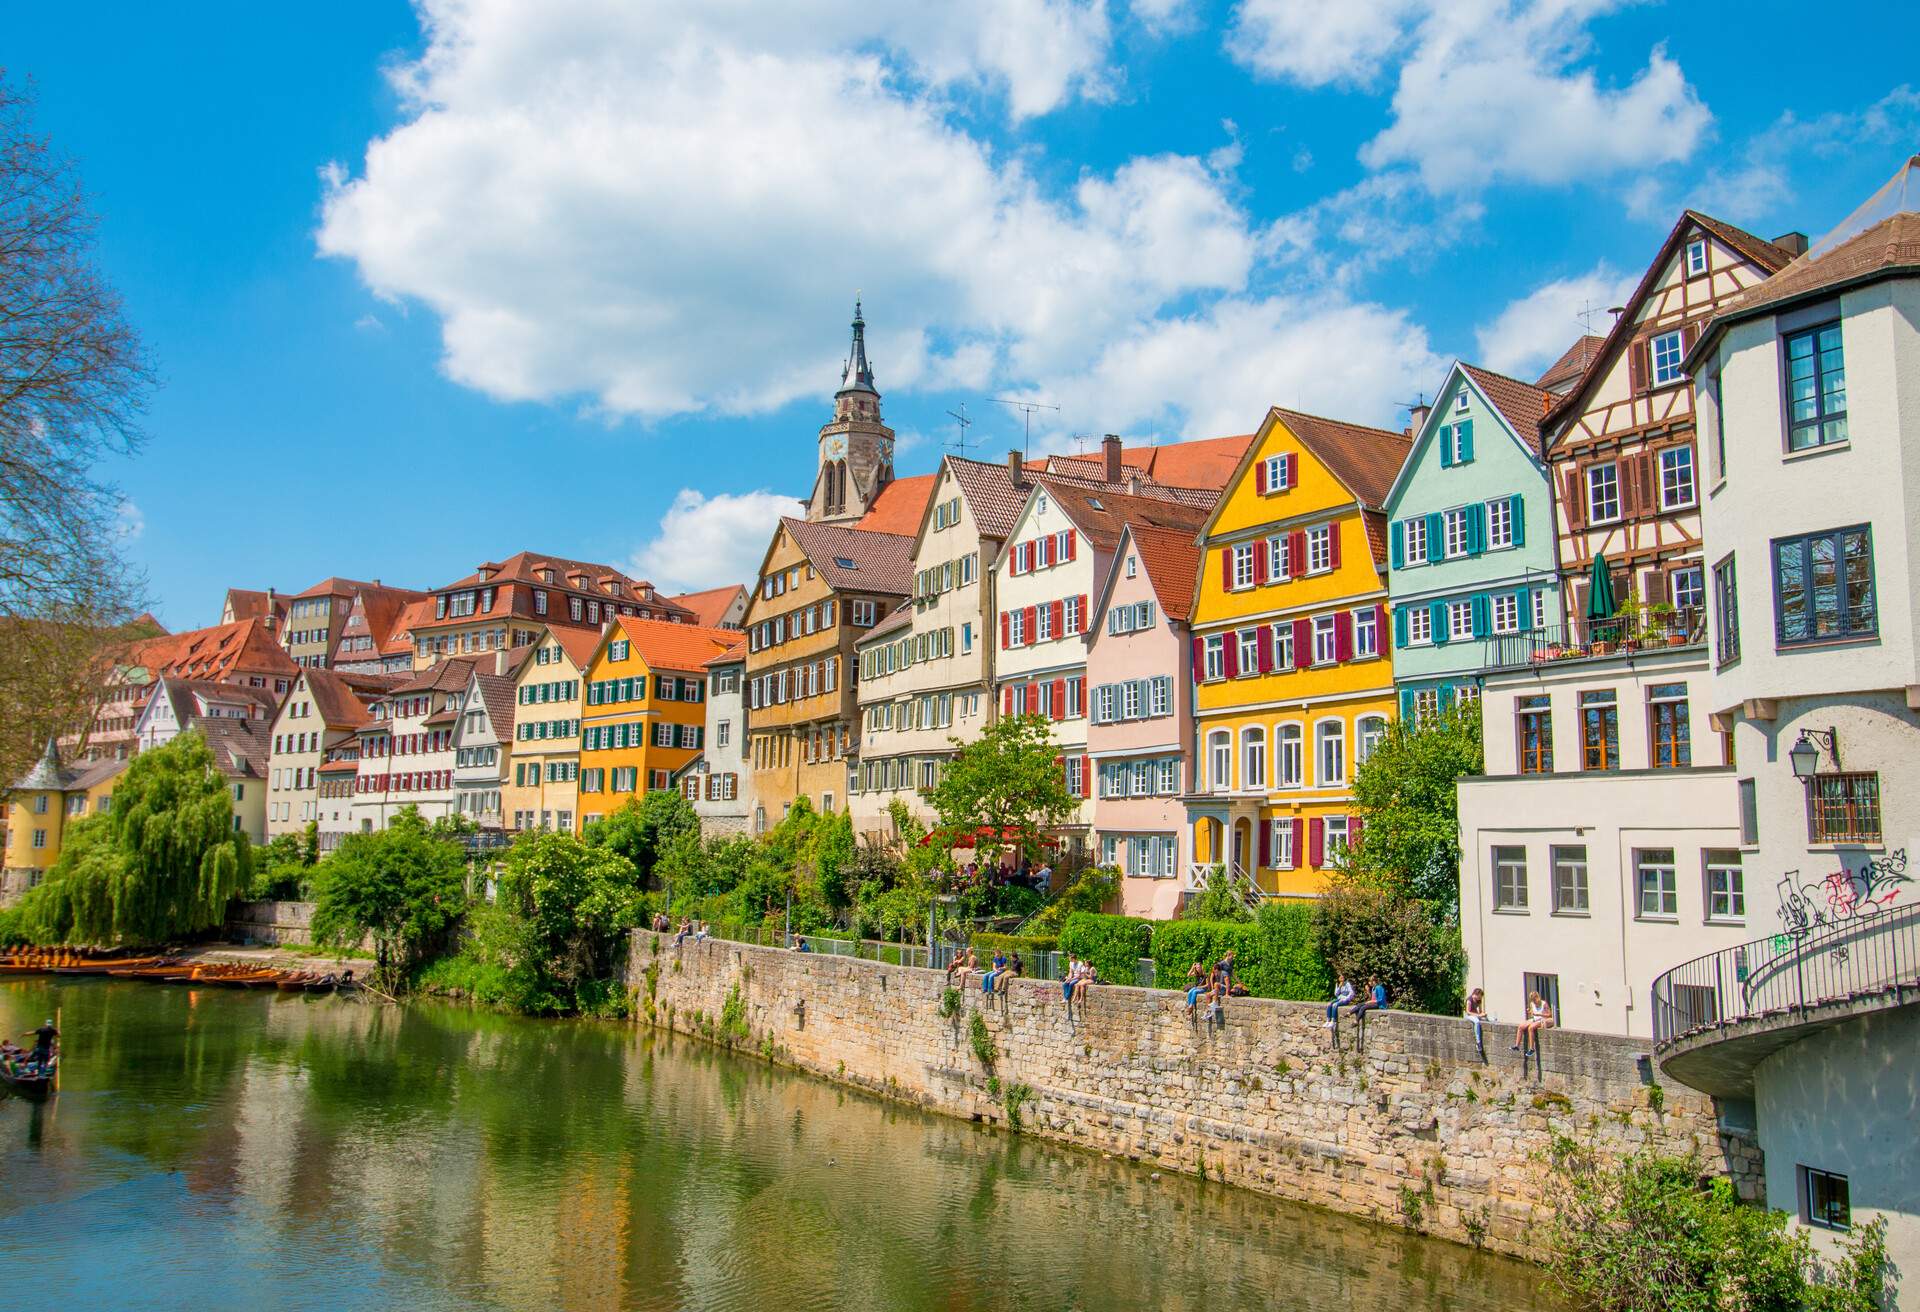 Tuebingen in the Stuttgart city ,Germany.Colorful house in riverside and blue sky. Beautiful old city in Europe.People sitting on the wall.Boats wooden moored at dock.; Shutterstock ID 665140723